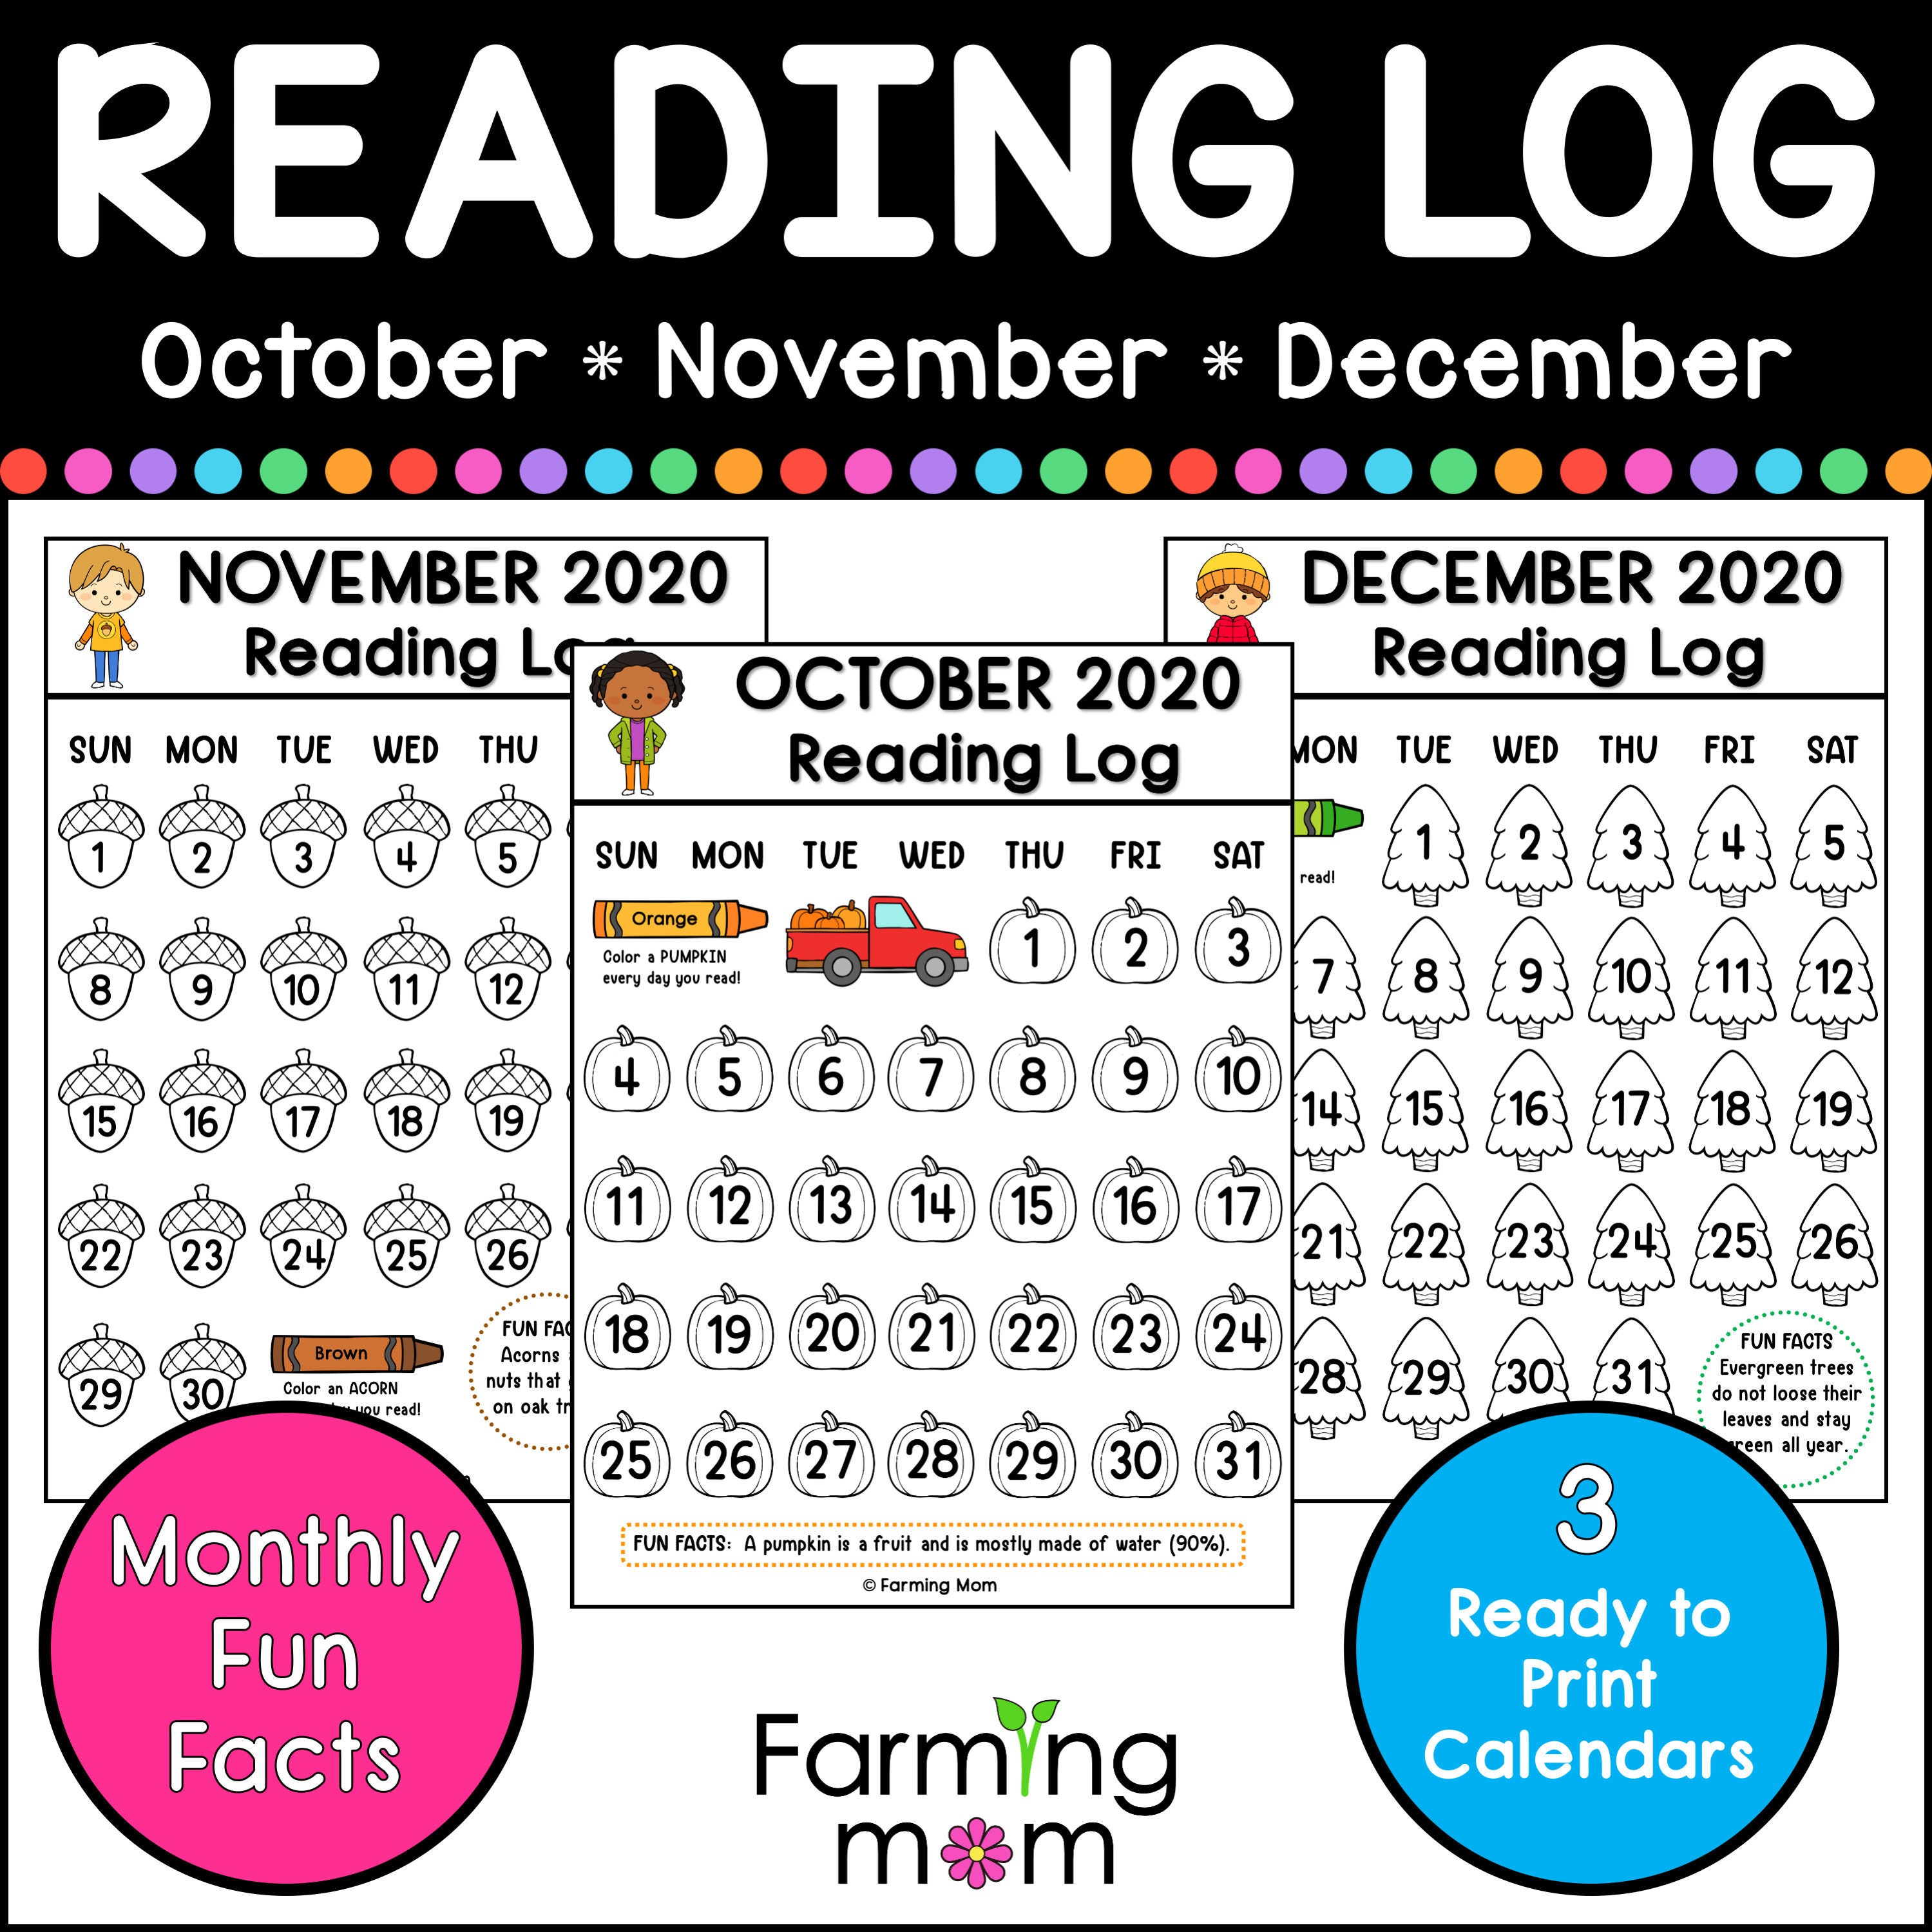 Coloring Monthly Reading Log Calendar Fall 2020 | Etsy